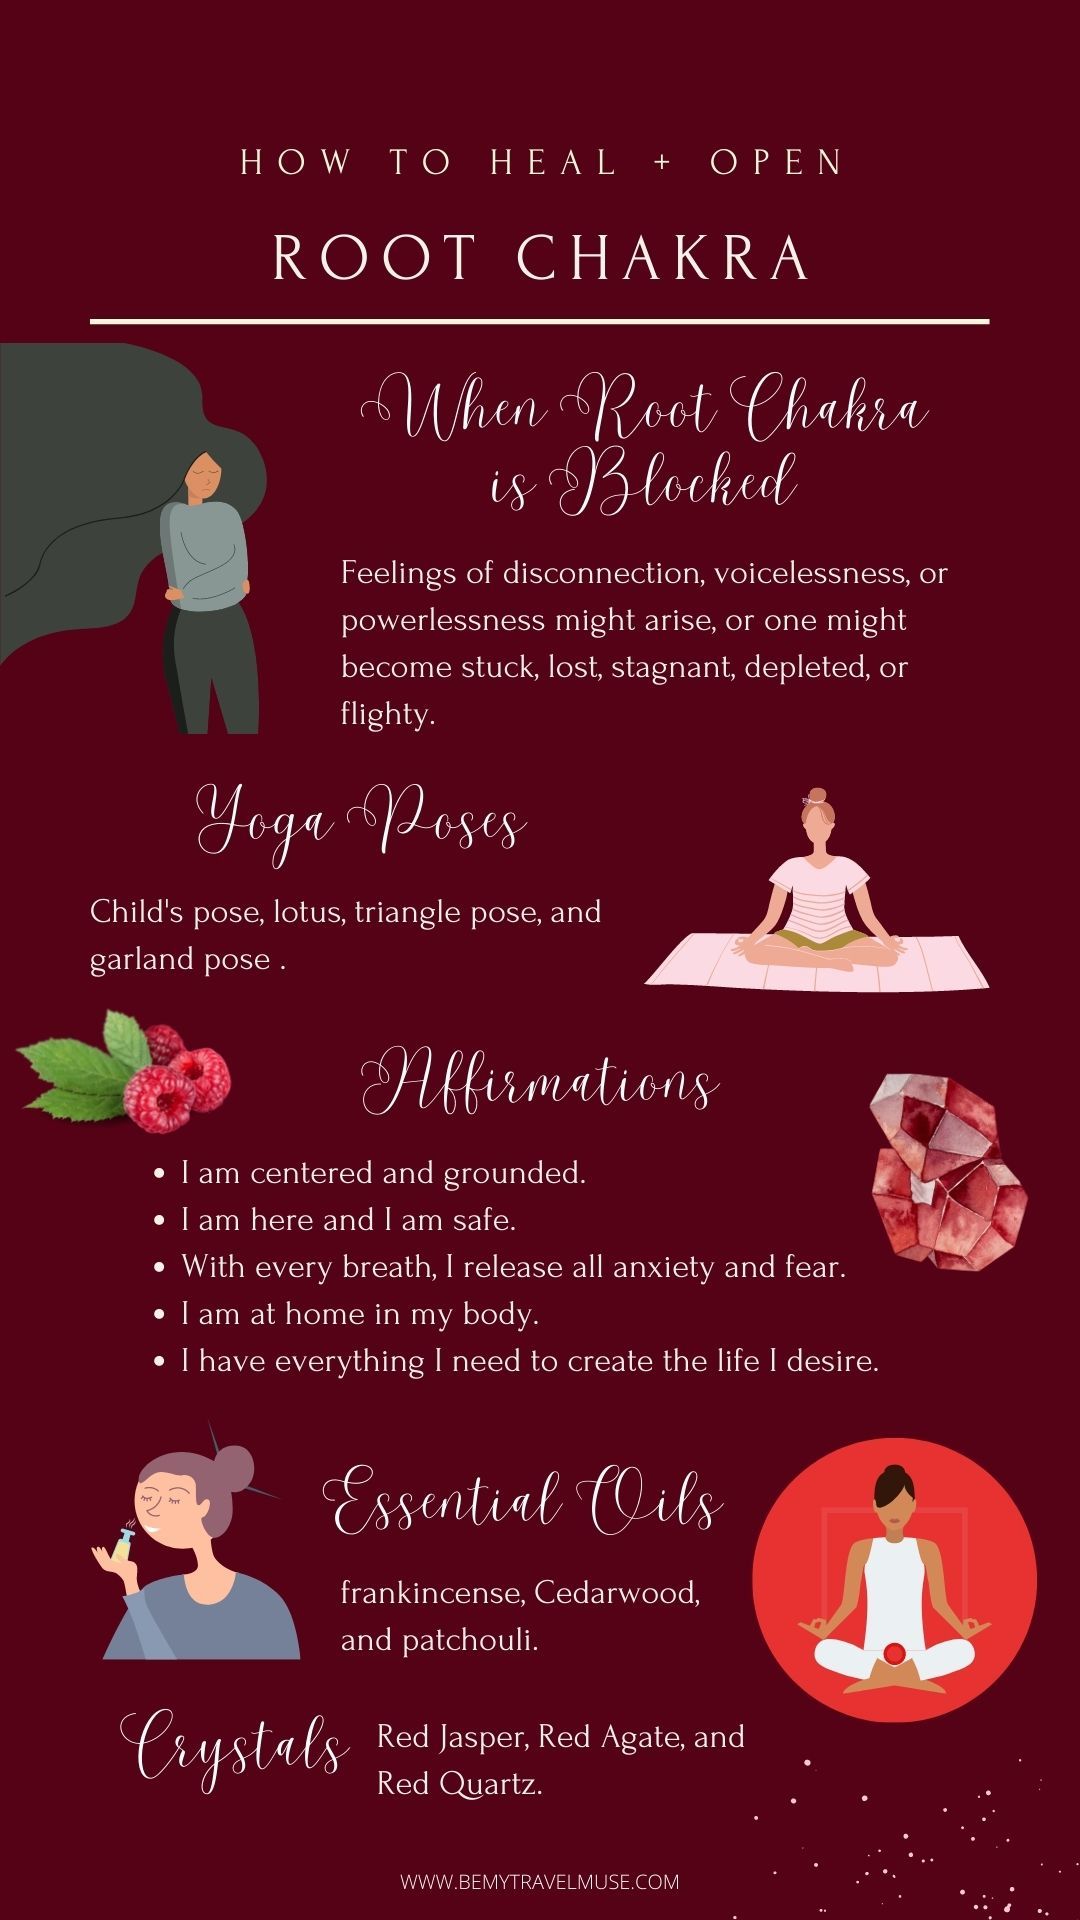 heal and open your root chakra through yoga poses, affirmations, essential oils, and crystals.